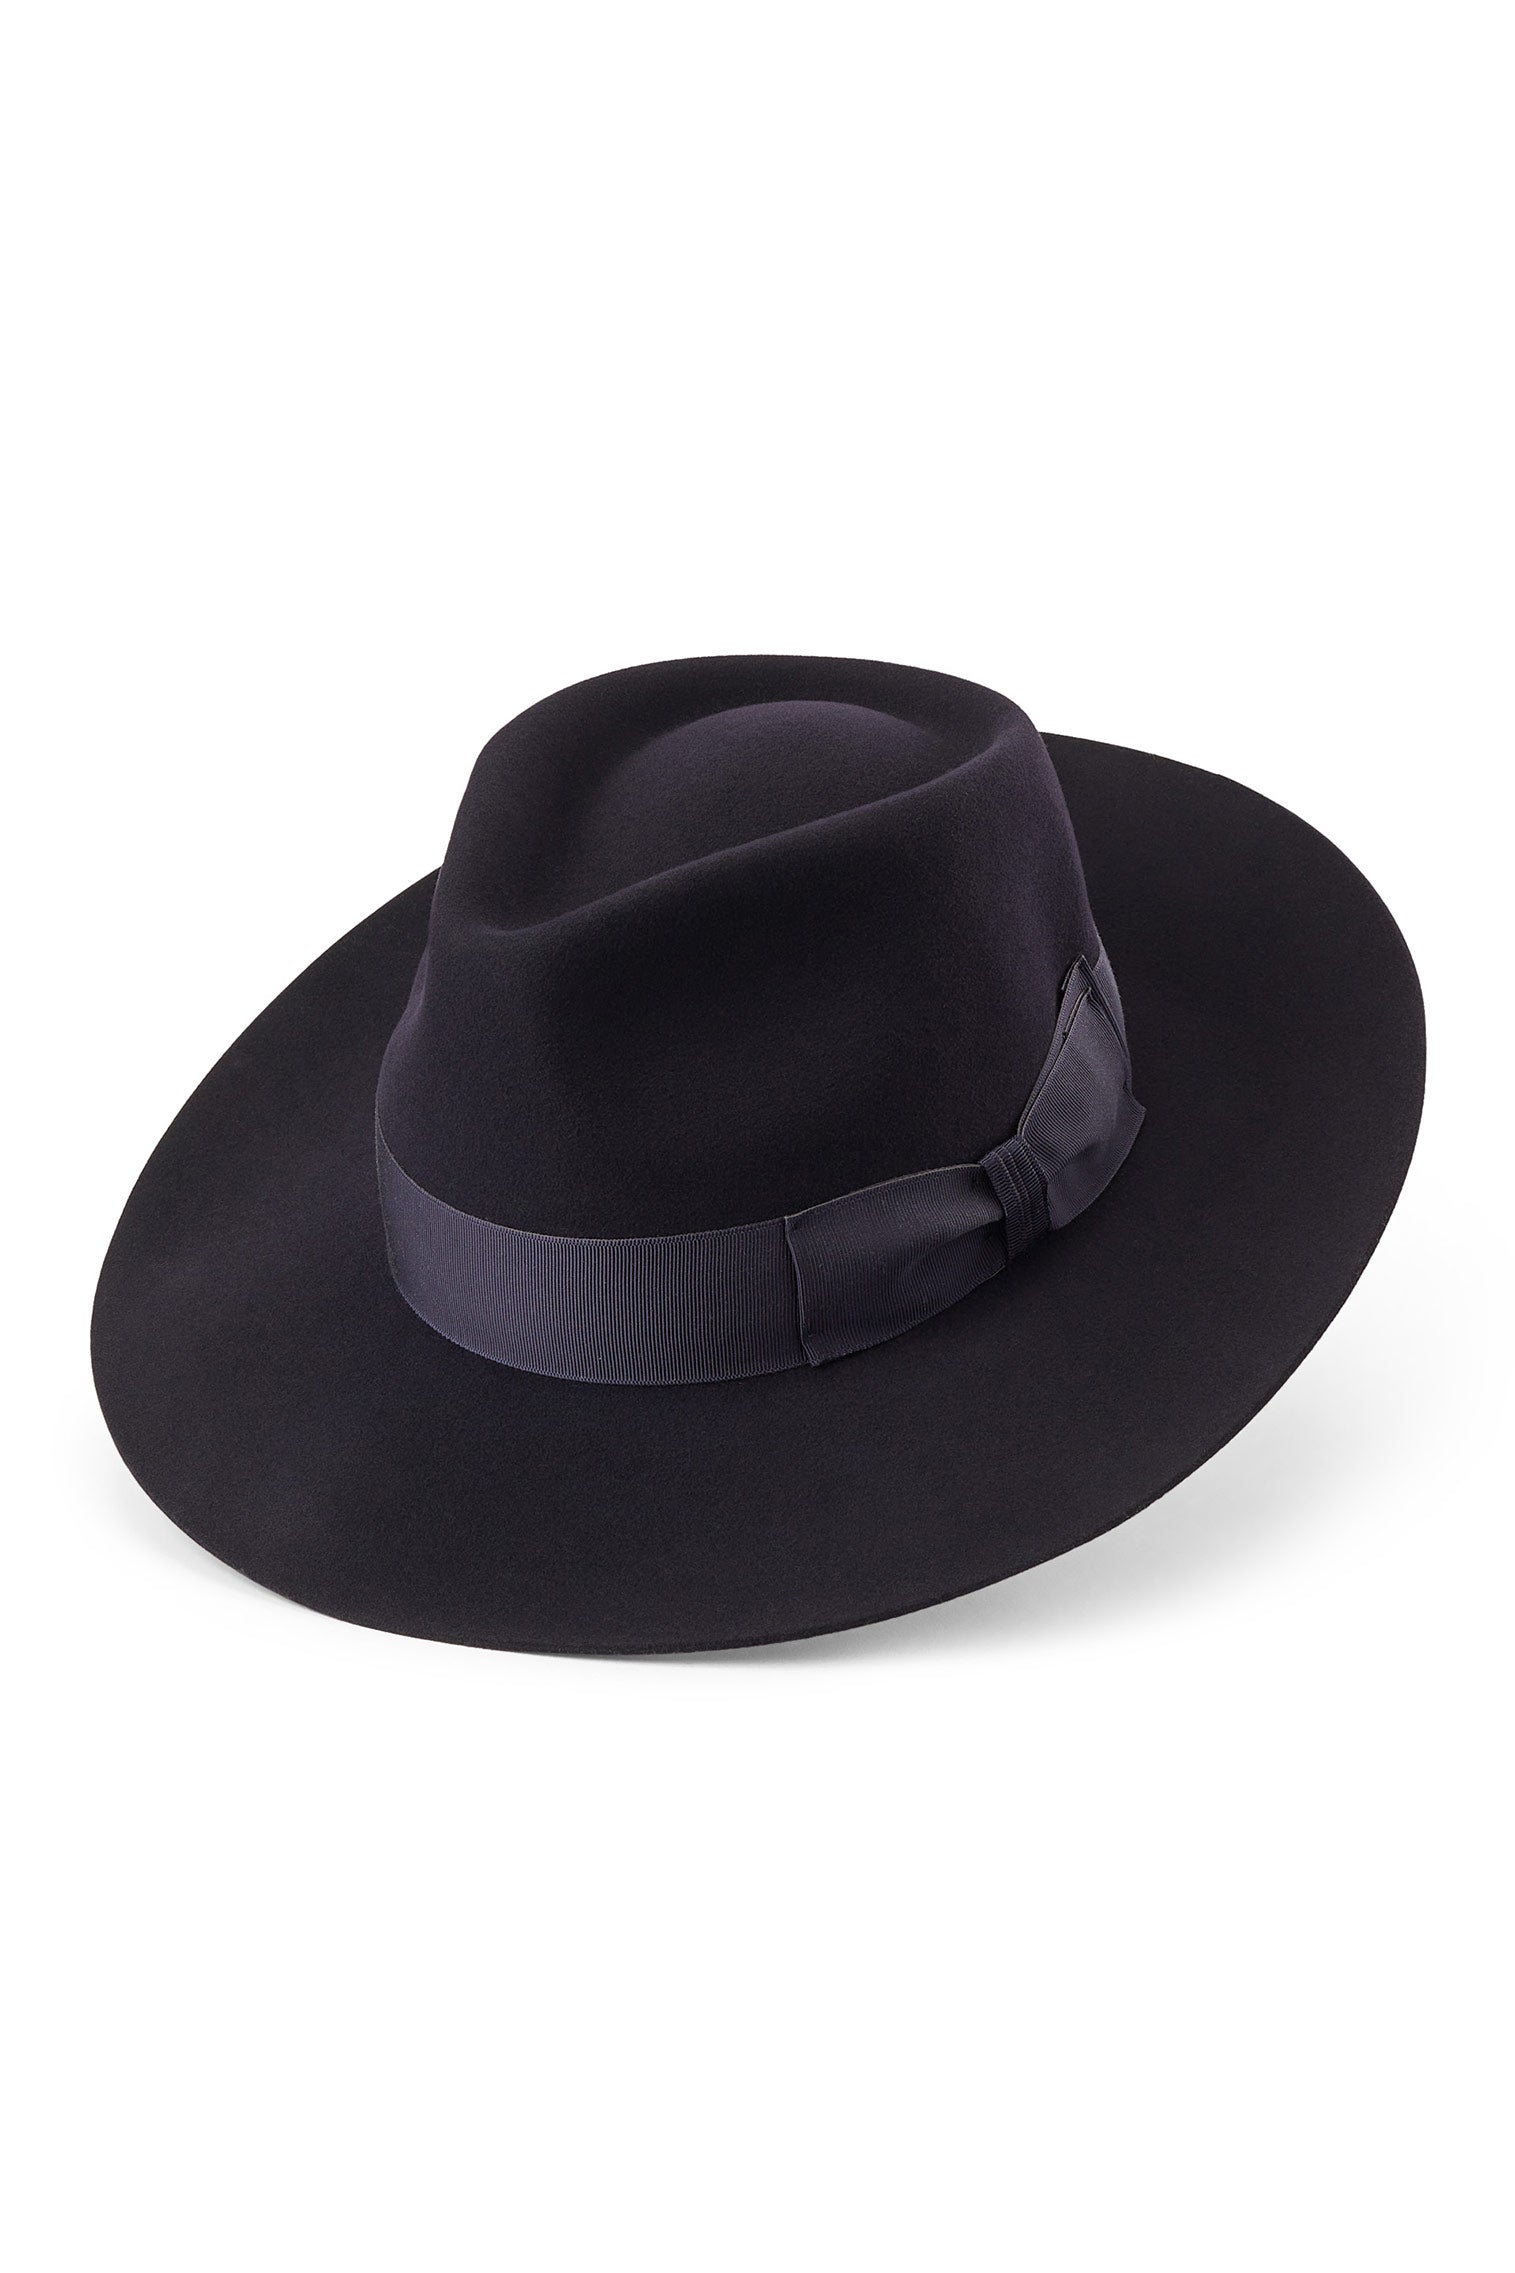 Escorial Wool Stafford Fedora - Hats for Oval Face Shapes - Lock & Co. Hatters London UK